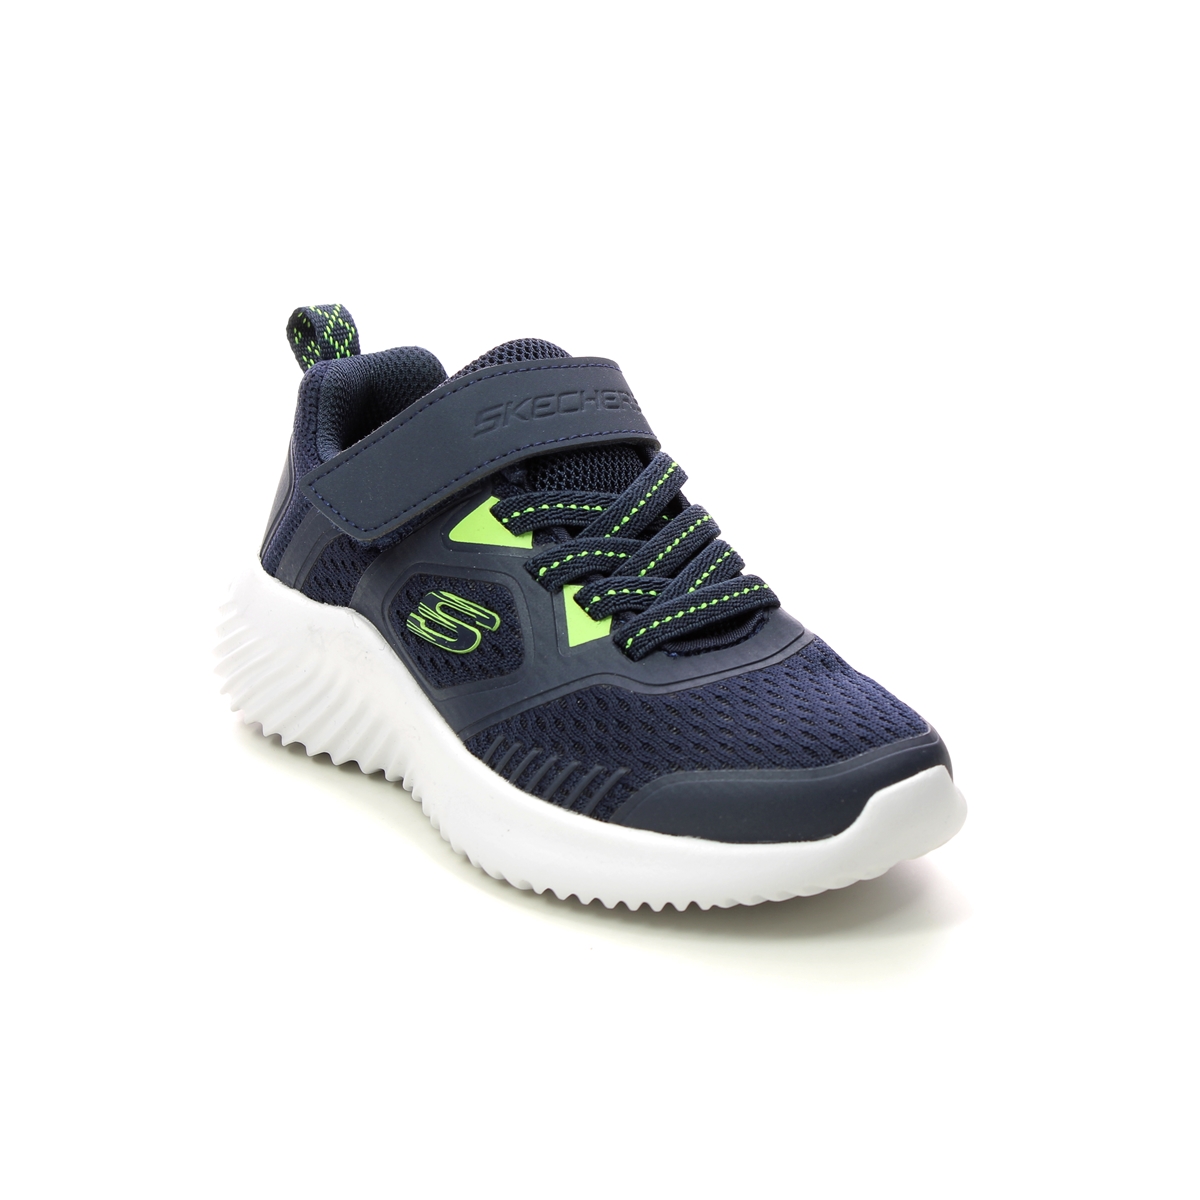 Skechers Bounder NVLM Navy Lime Kids trainers 403736L in a Plain Textile in Size 30